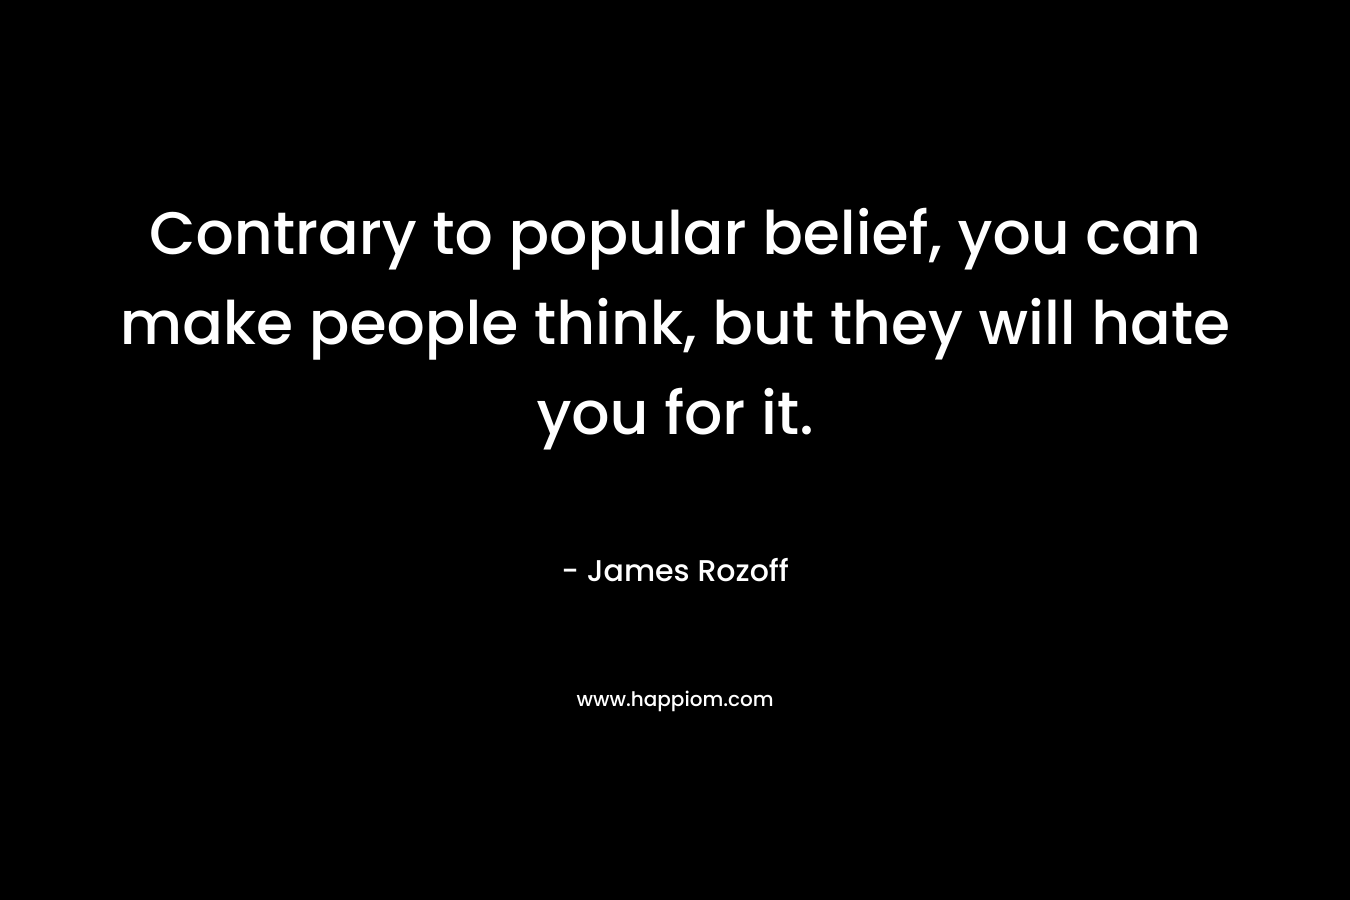 Contrary to popular belief, you can make people think, but they will hate you for it. – James Rozoff